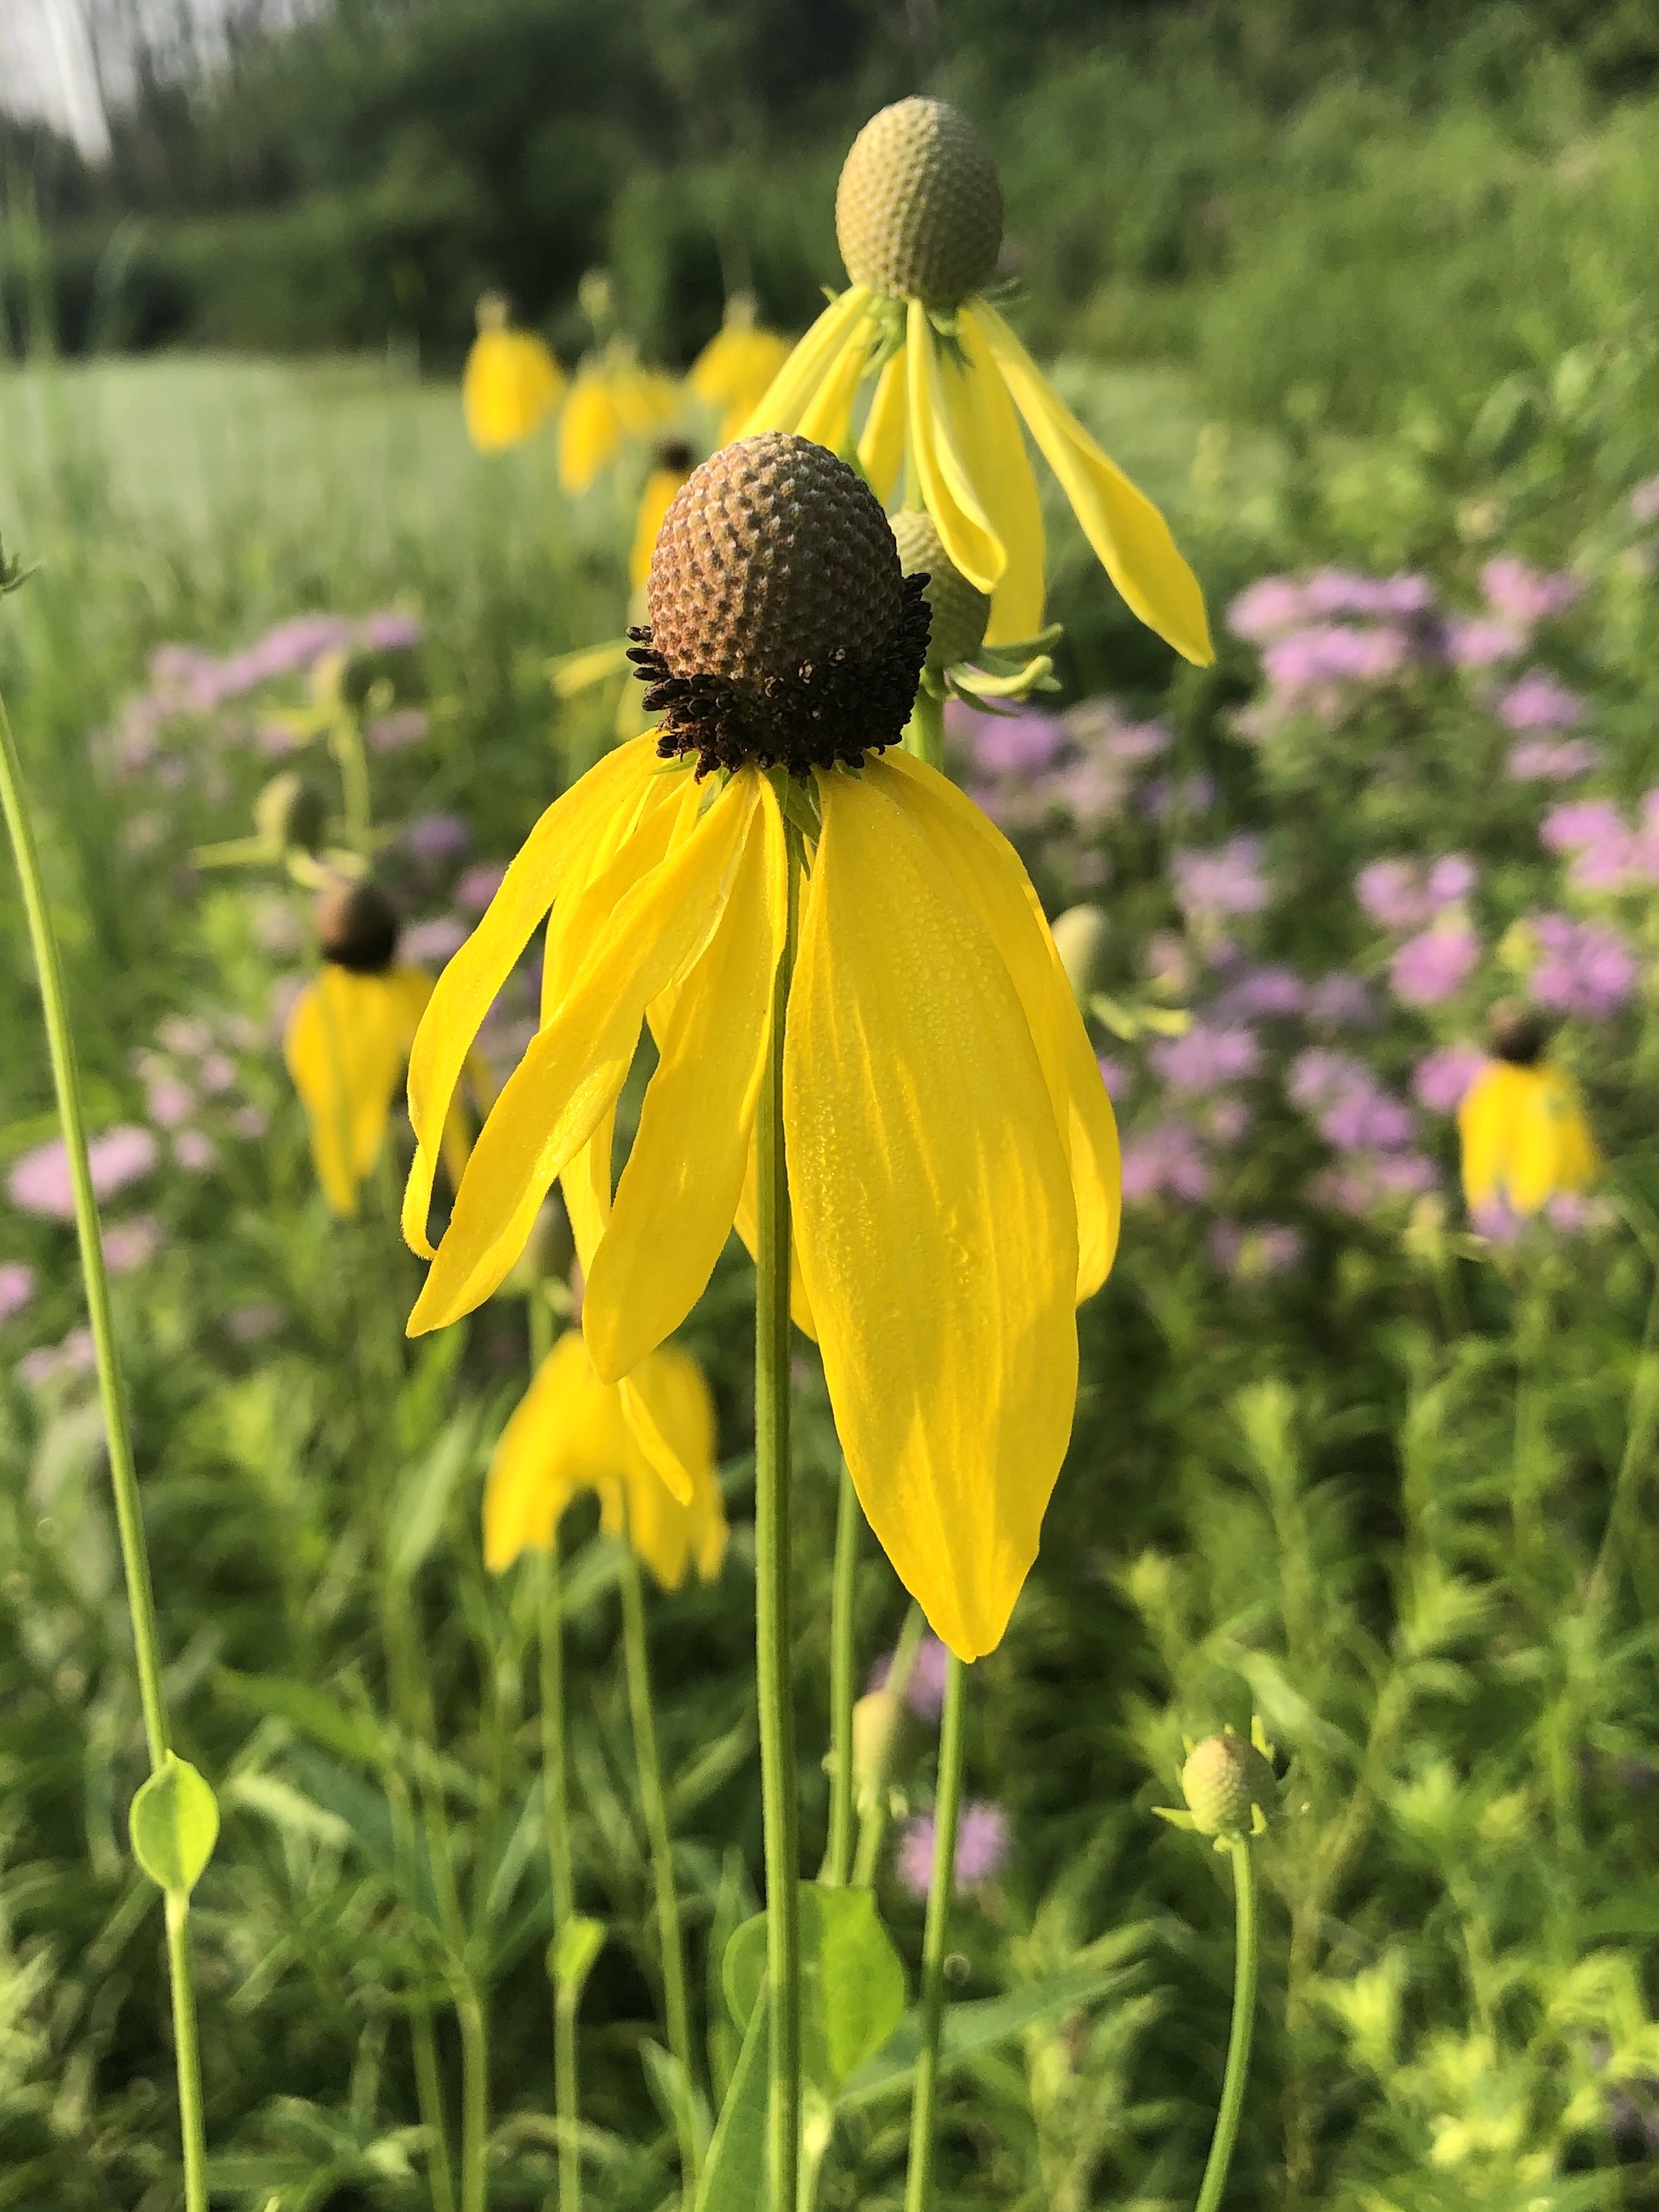 Gray-headed coneflower on shore of Marion Dunn Pond in Madison, Wisconsin on  July 16, 2021.